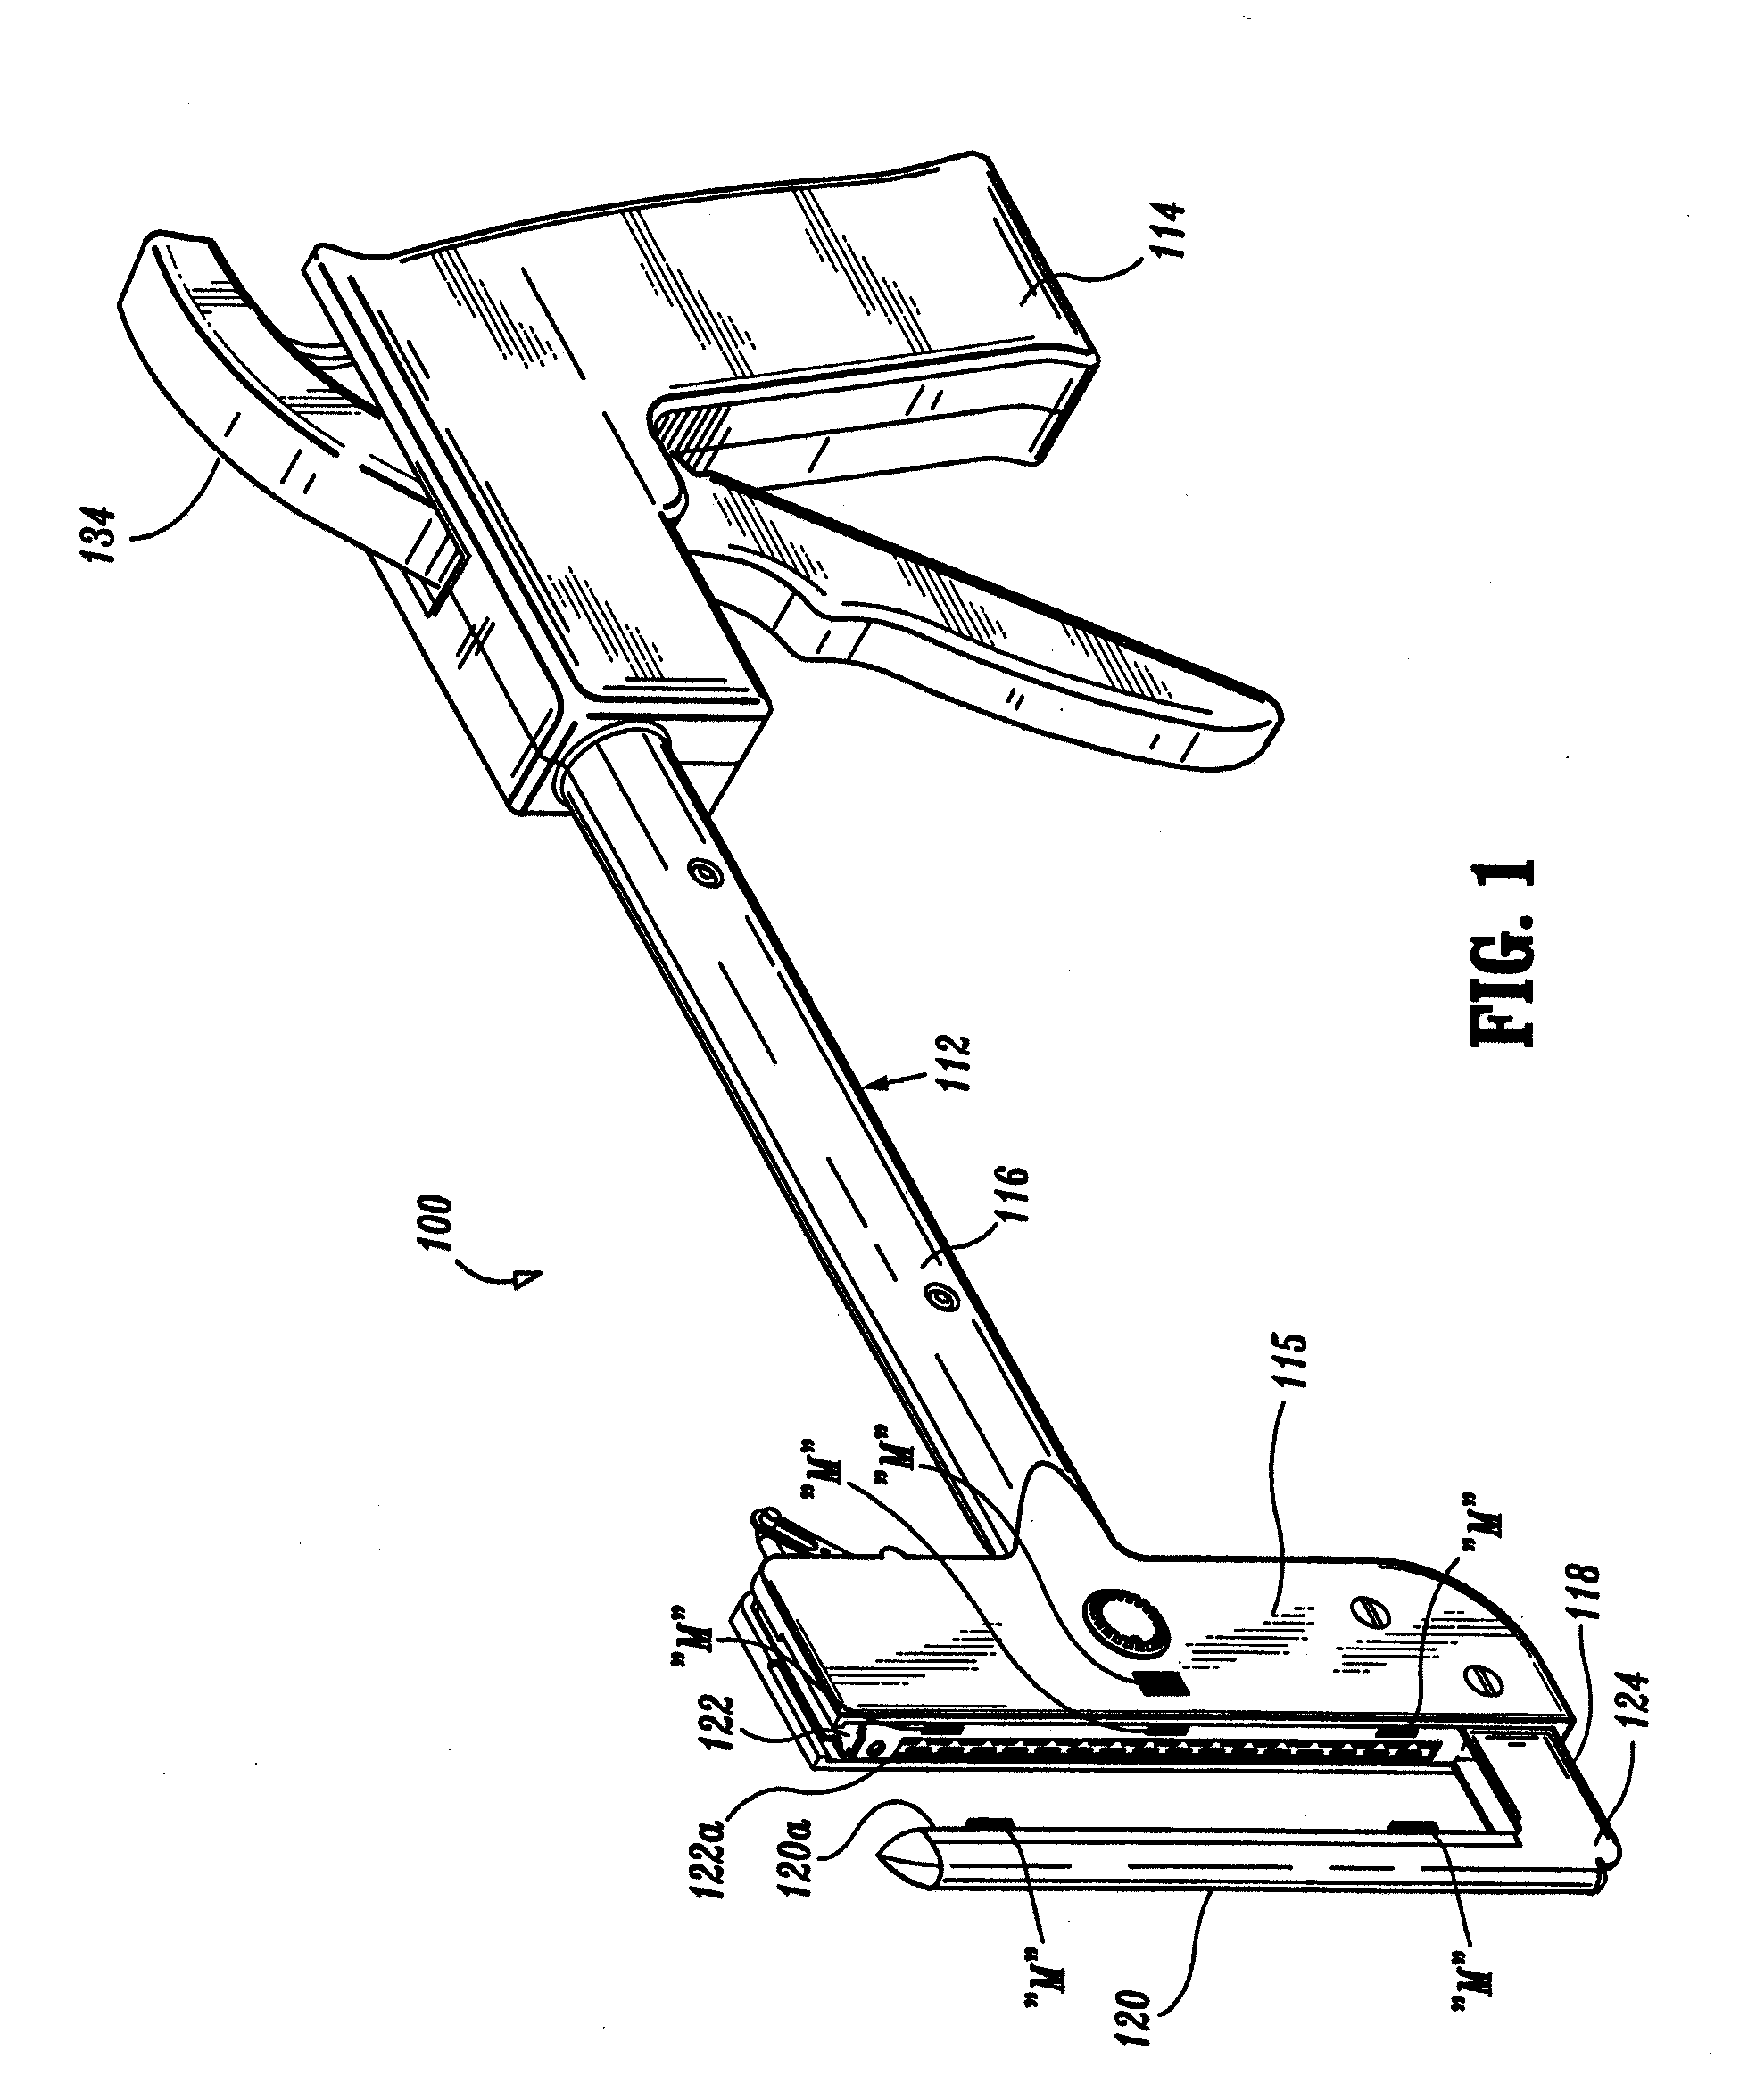 Surgical Instrument Including MEMS Devices